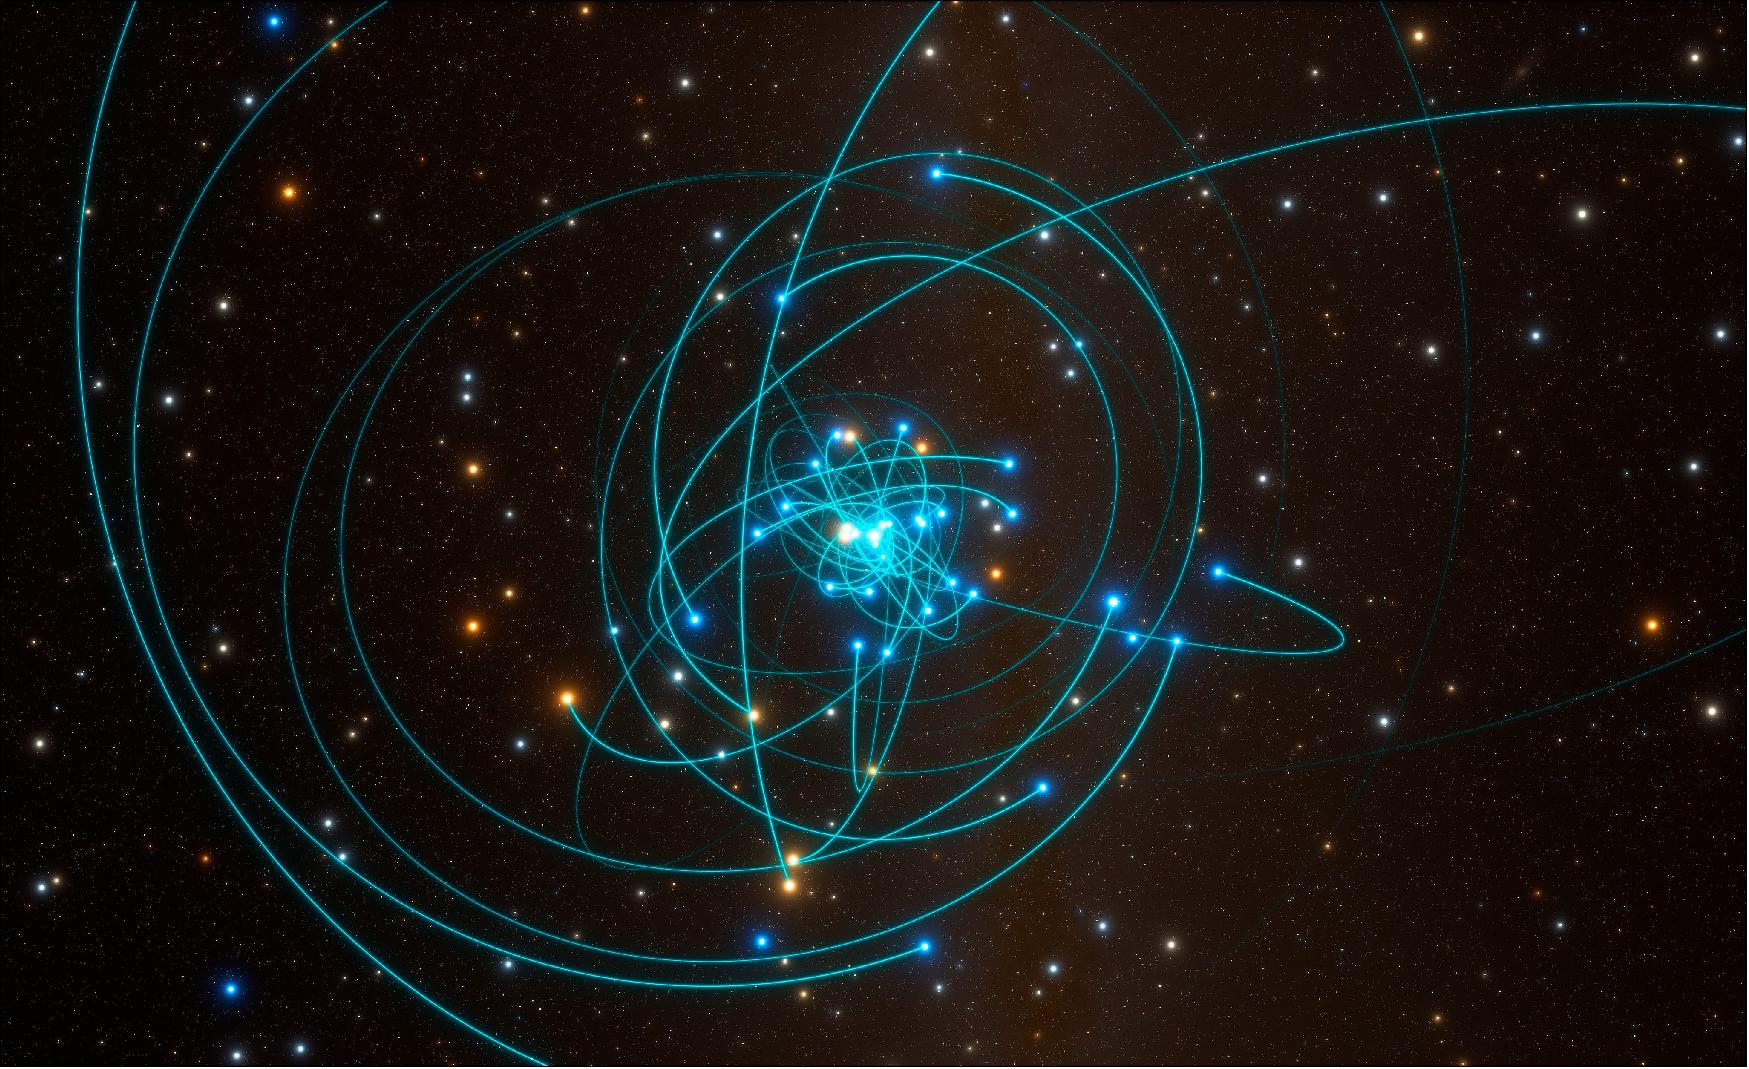 Figure 40: This simulation shows the orbits of stars very close to the supermassive black hole at the heart of the Milky Way. One of these stars, named S2, orbits every 16 years and is passing very close to the black hole in May 2018. This is a perfect laboratory to test gravitational physics and specifically Einstein's general theory of relativity (image credit: ESO/L. Calçada/spaceengine.org)